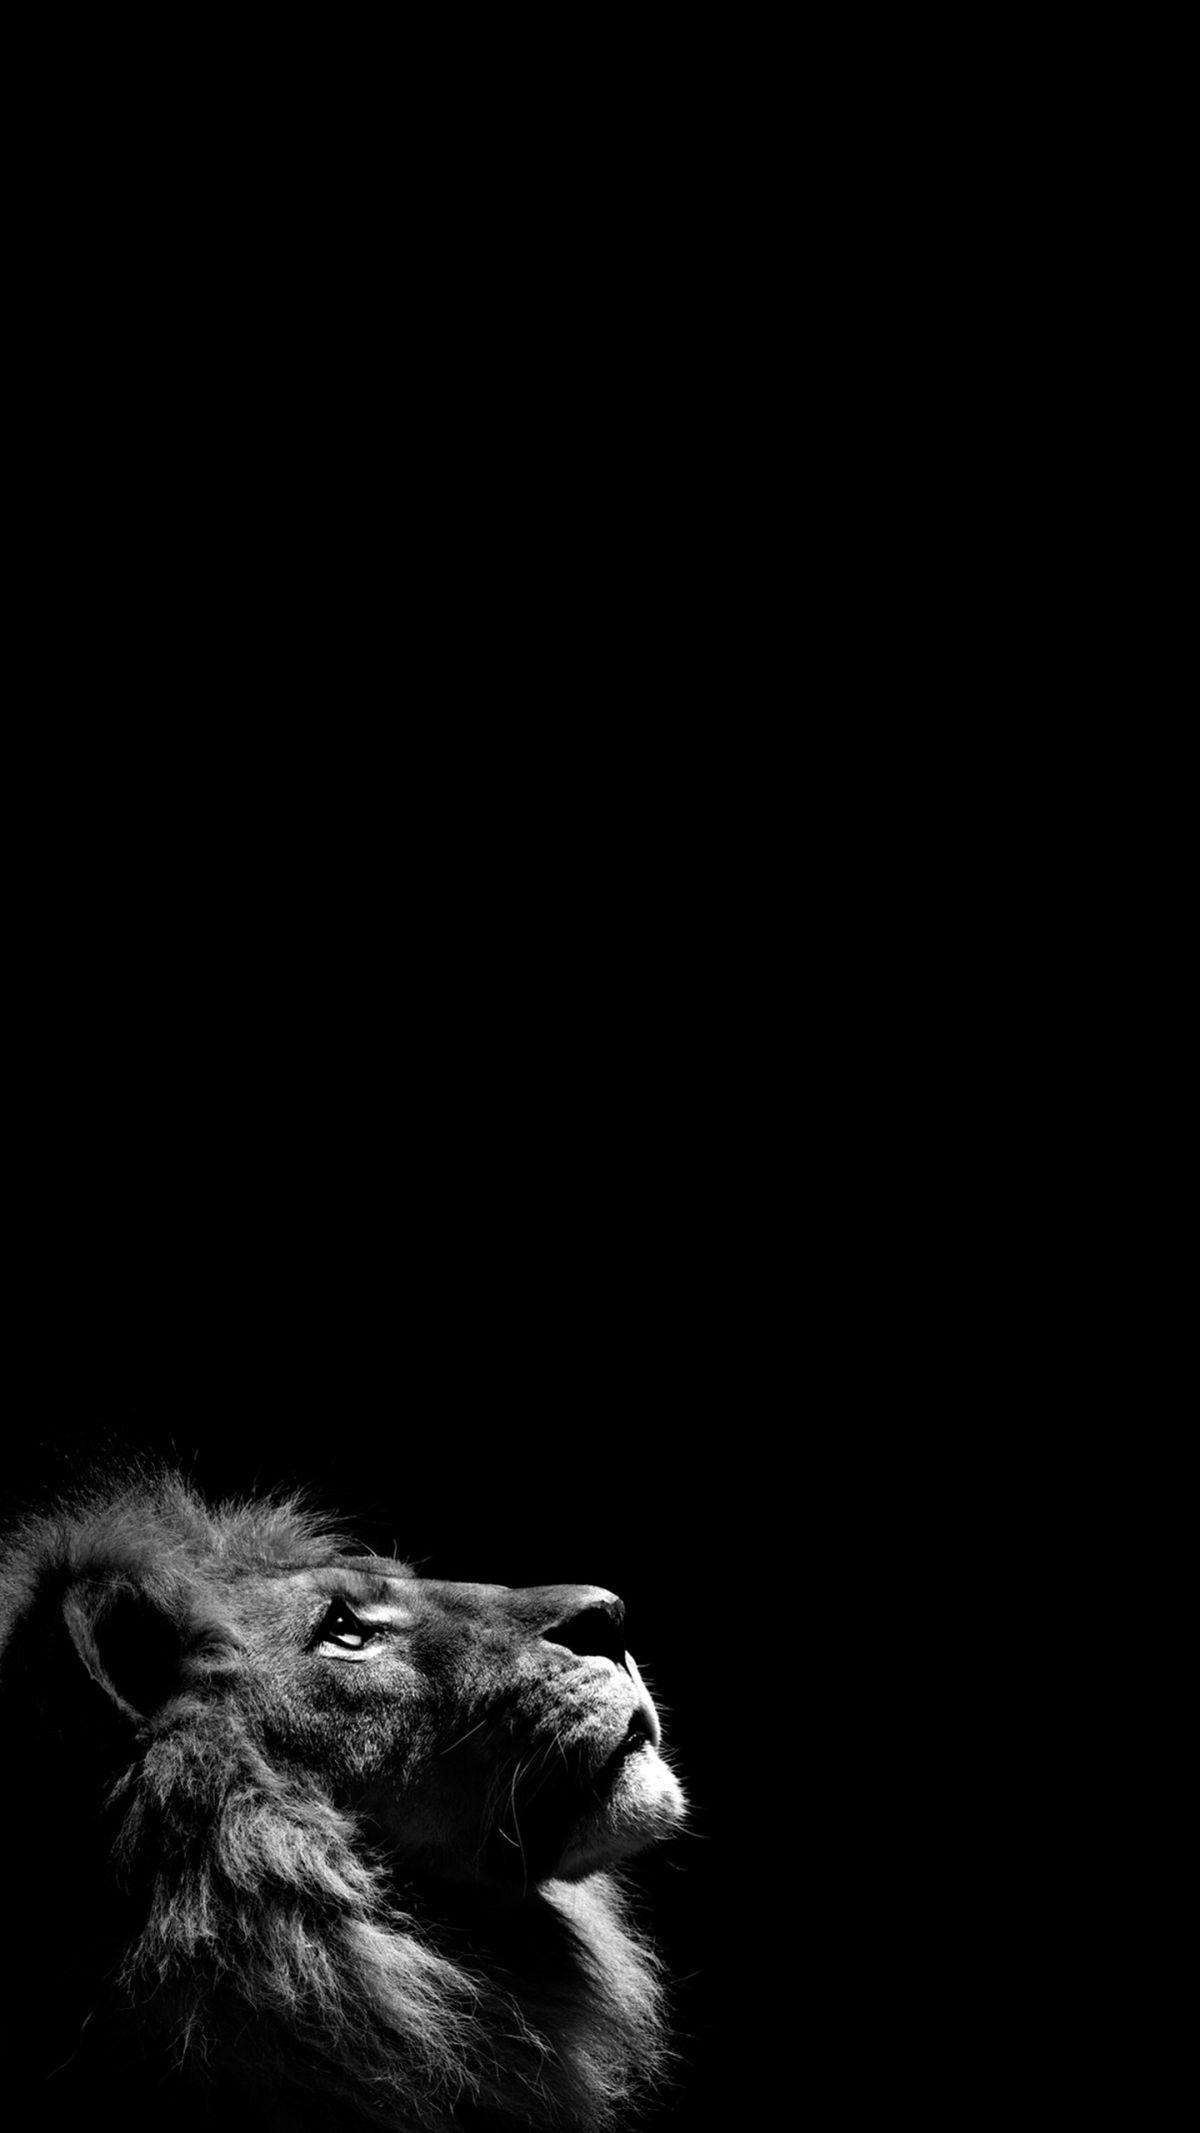 Black Lion iPhone Wallpapers - Wallpaper Cave